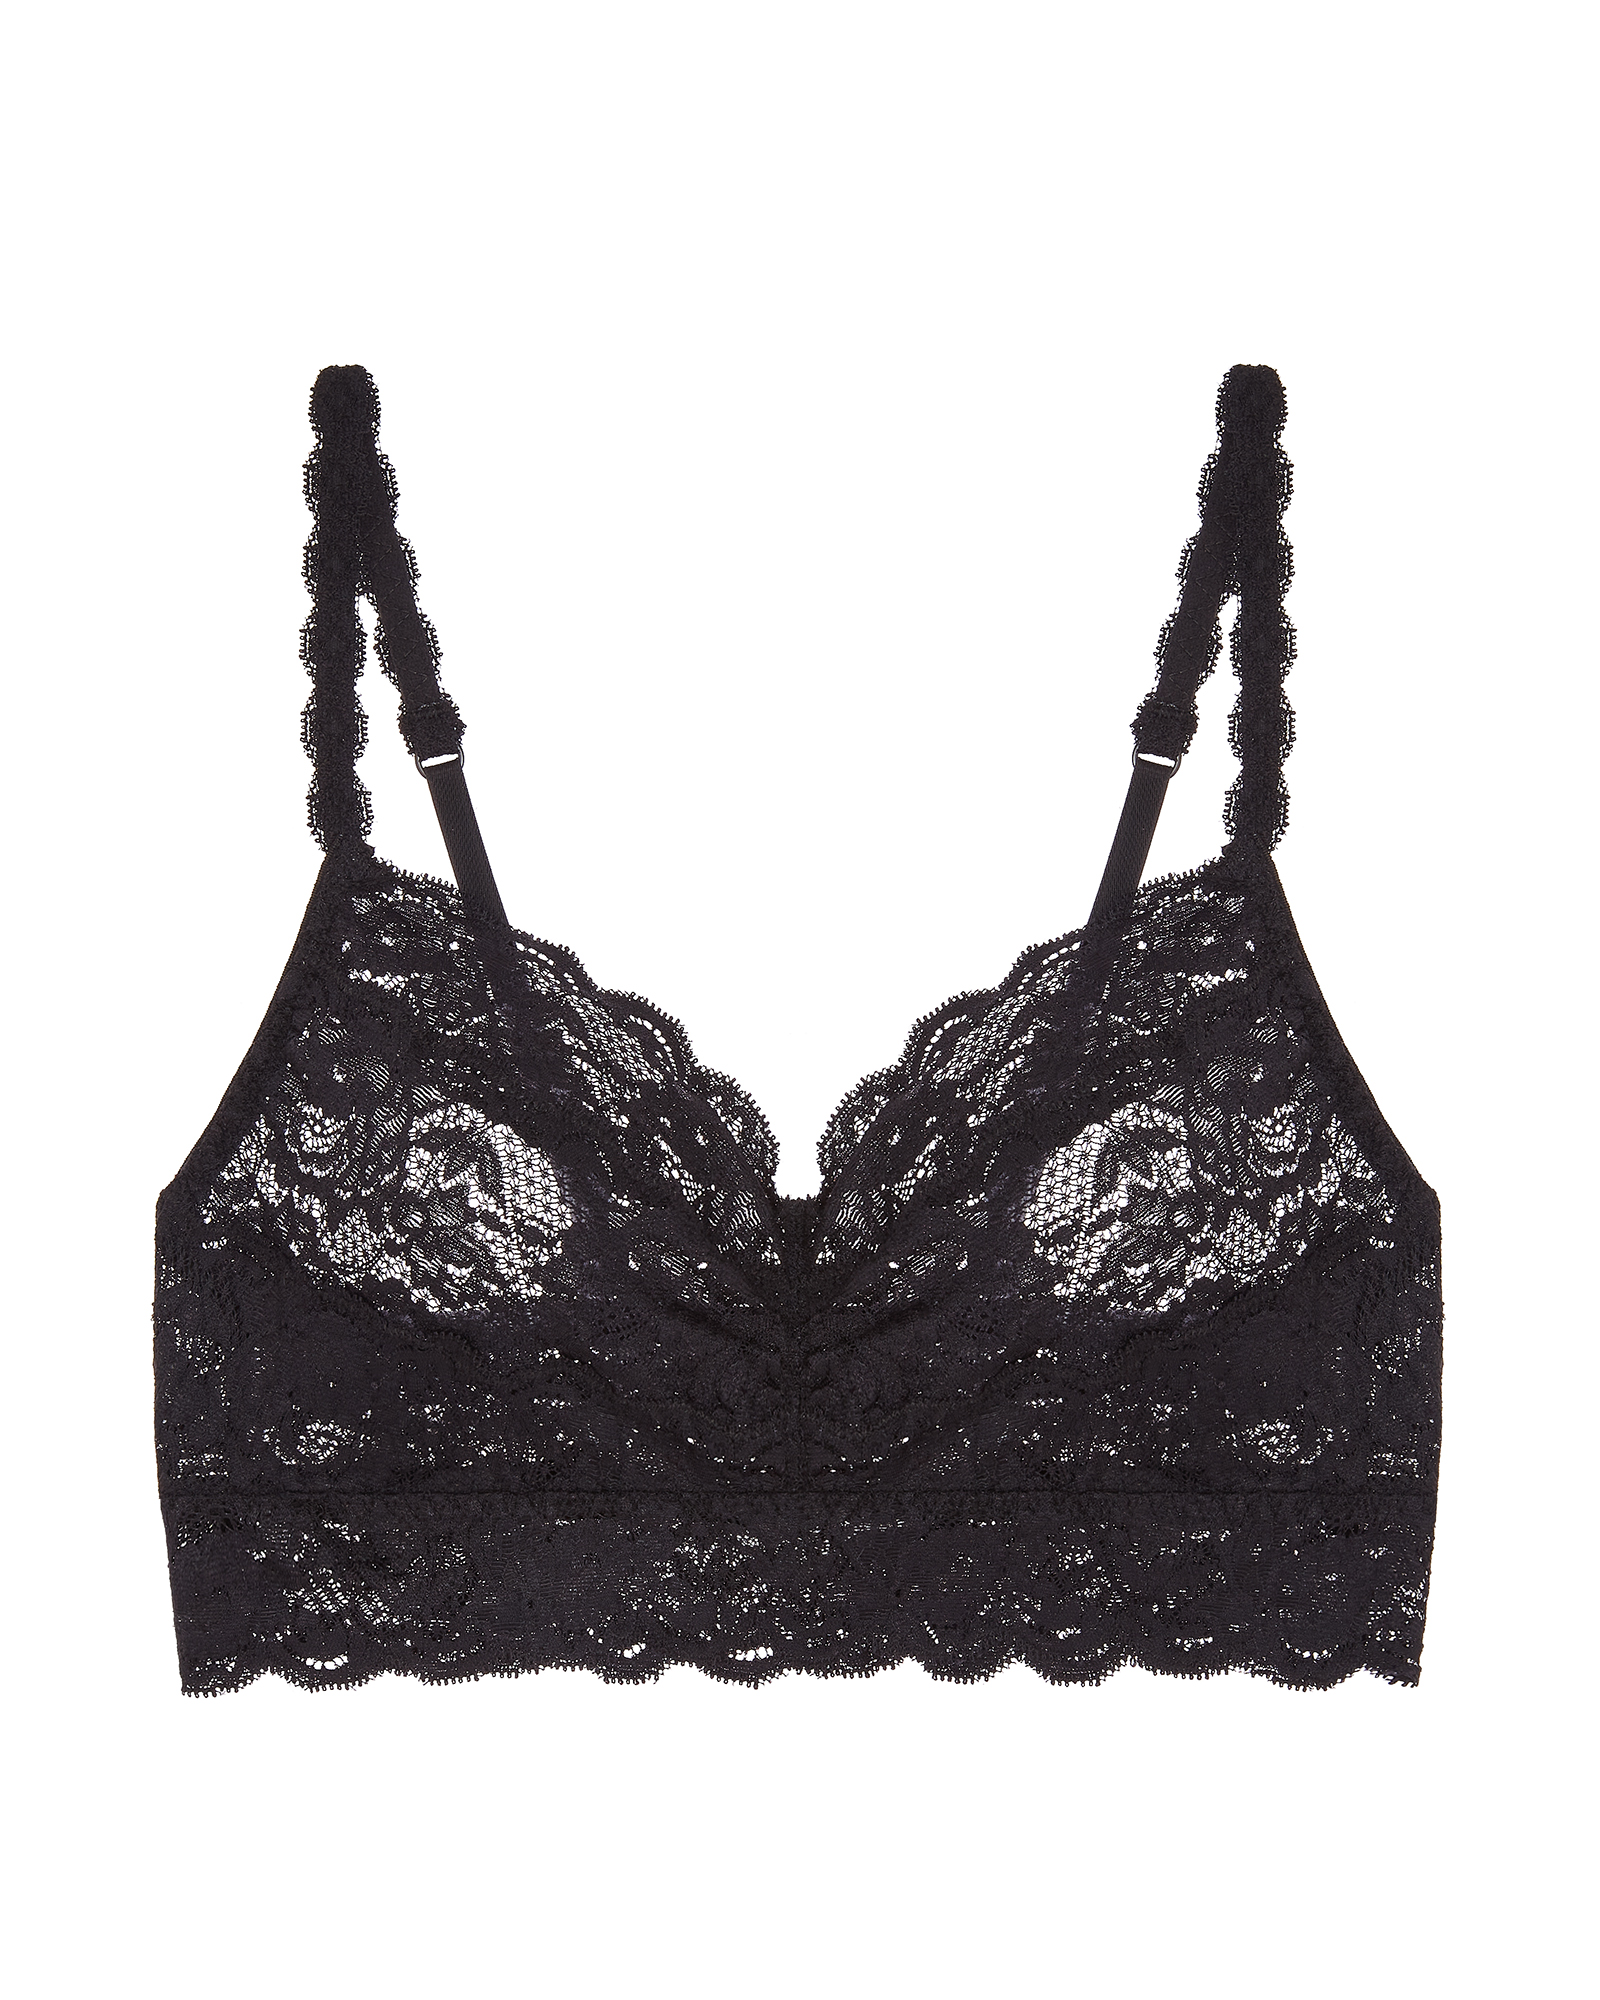 Sexy Lingerie to Gift Yourself This Valentine's DayHelloGiggles